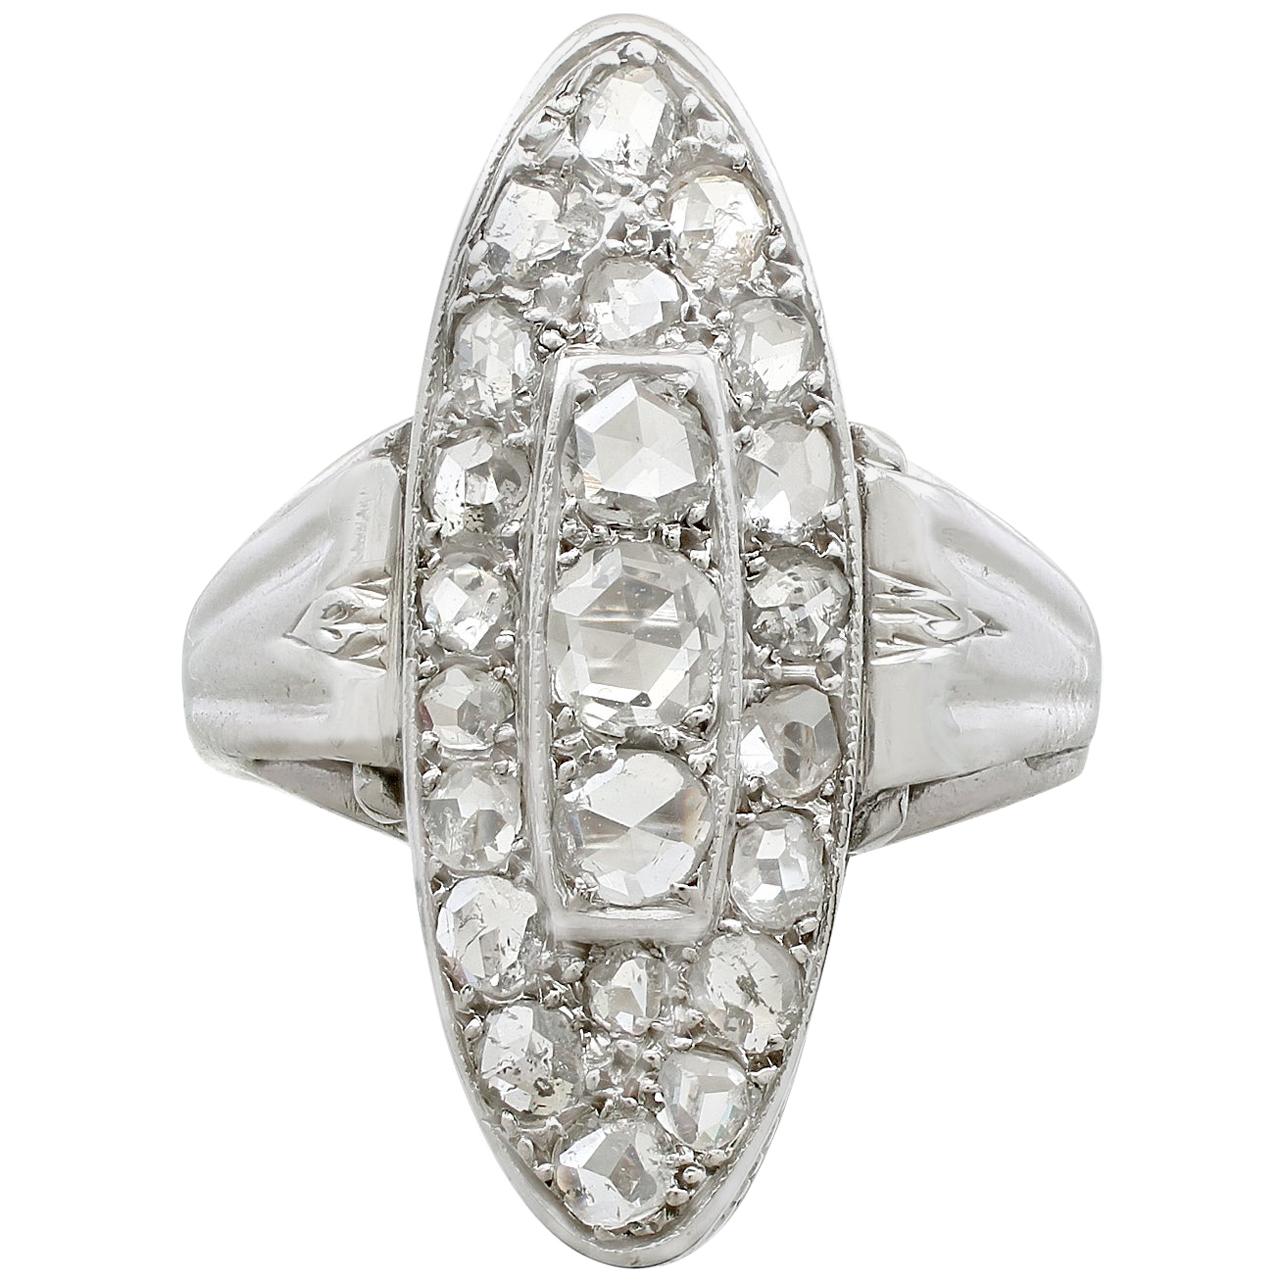 Antique 1930s 1.48 Carat Diamond and White Gold Marquise Ring